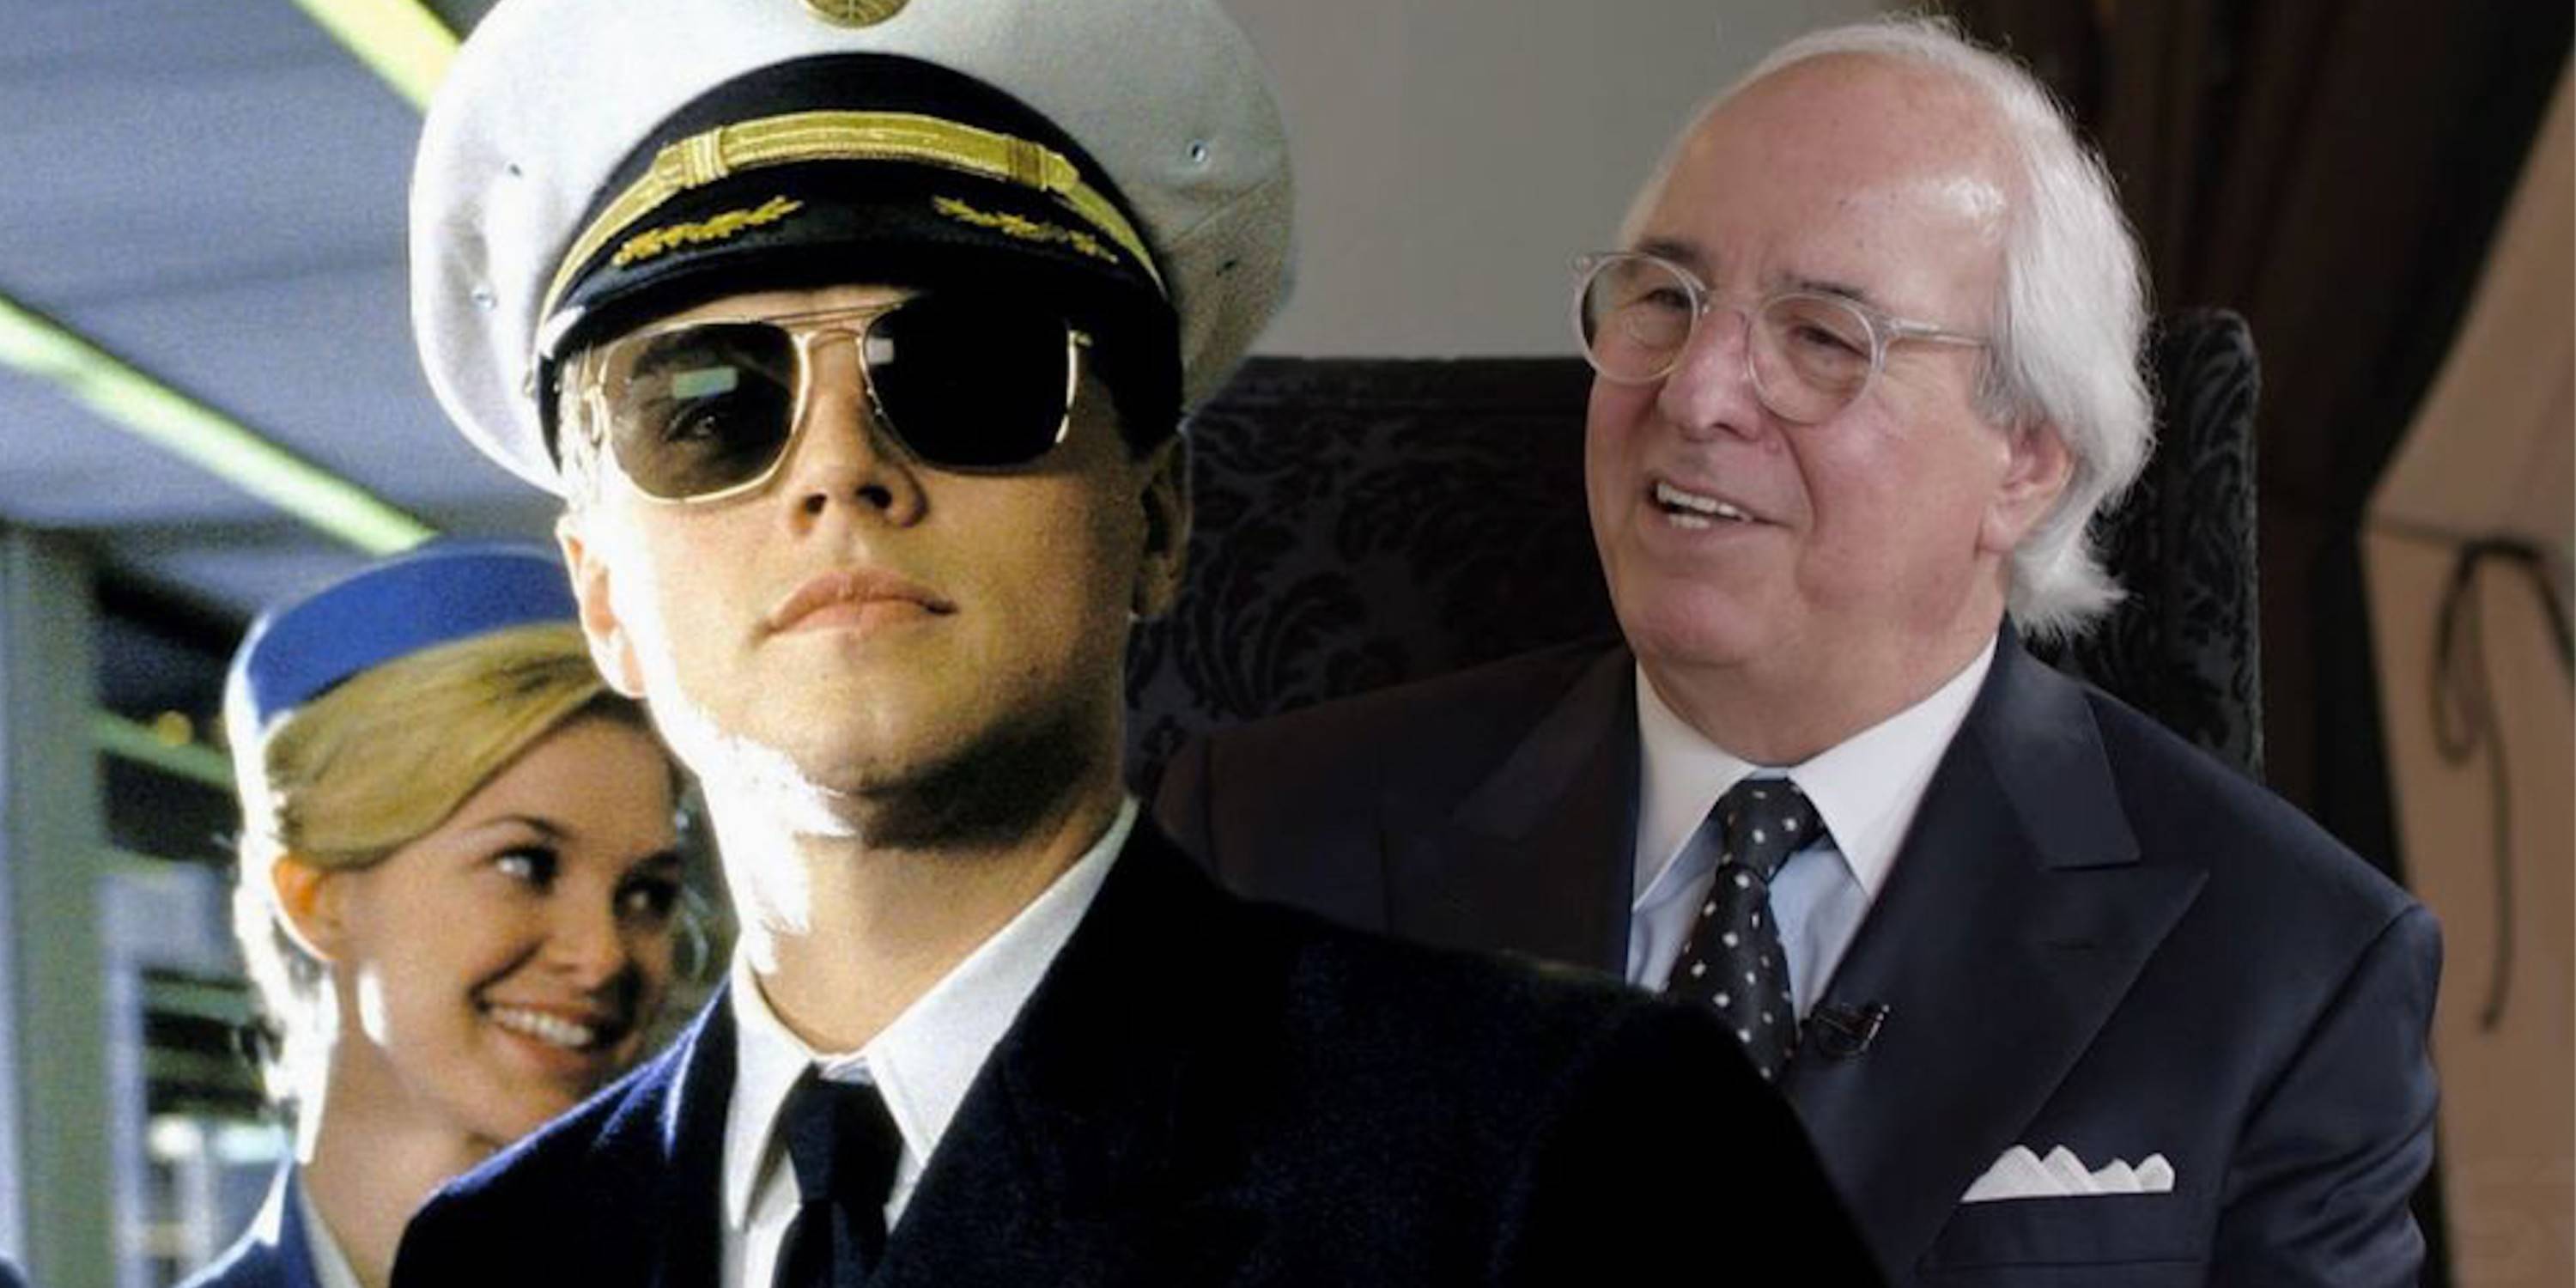  Leonardo DiCaprio: Frank Abagnale dans Catch Me If You Can 